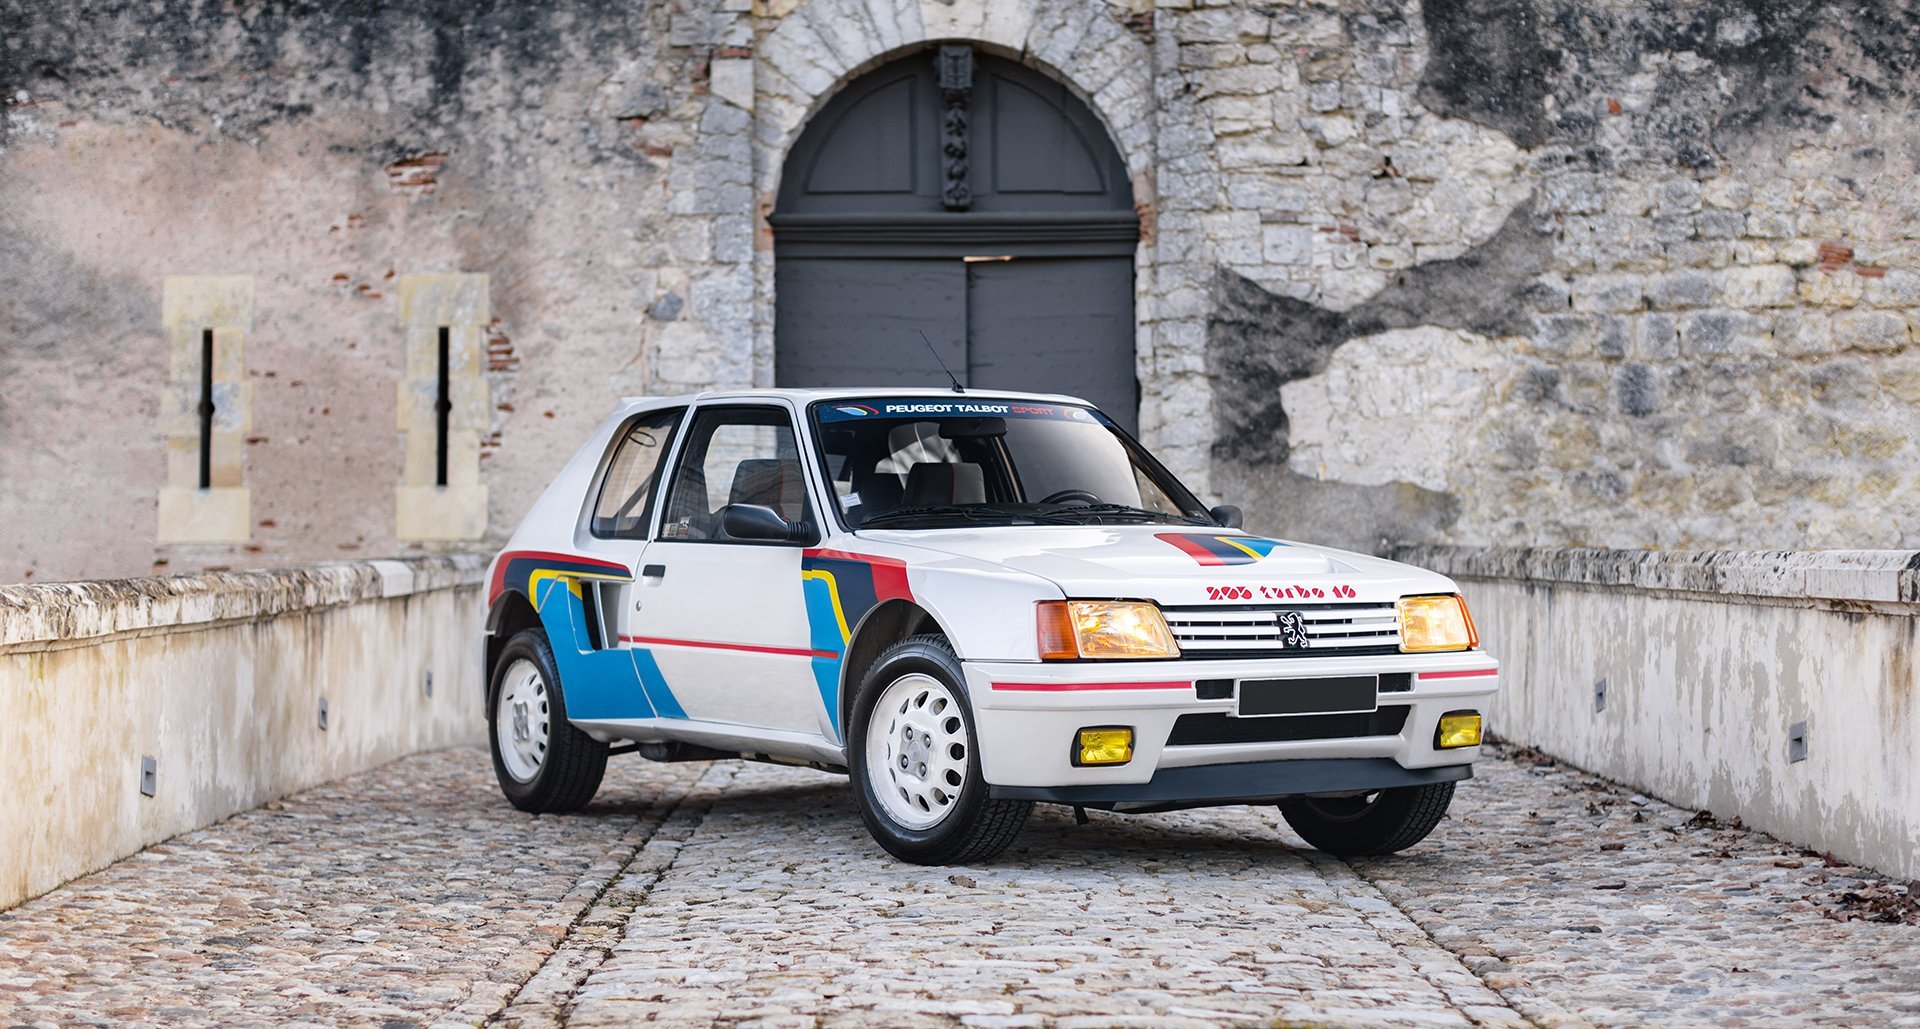 This Peugeot 205 Turbo 16 went from road car to hillclimb king